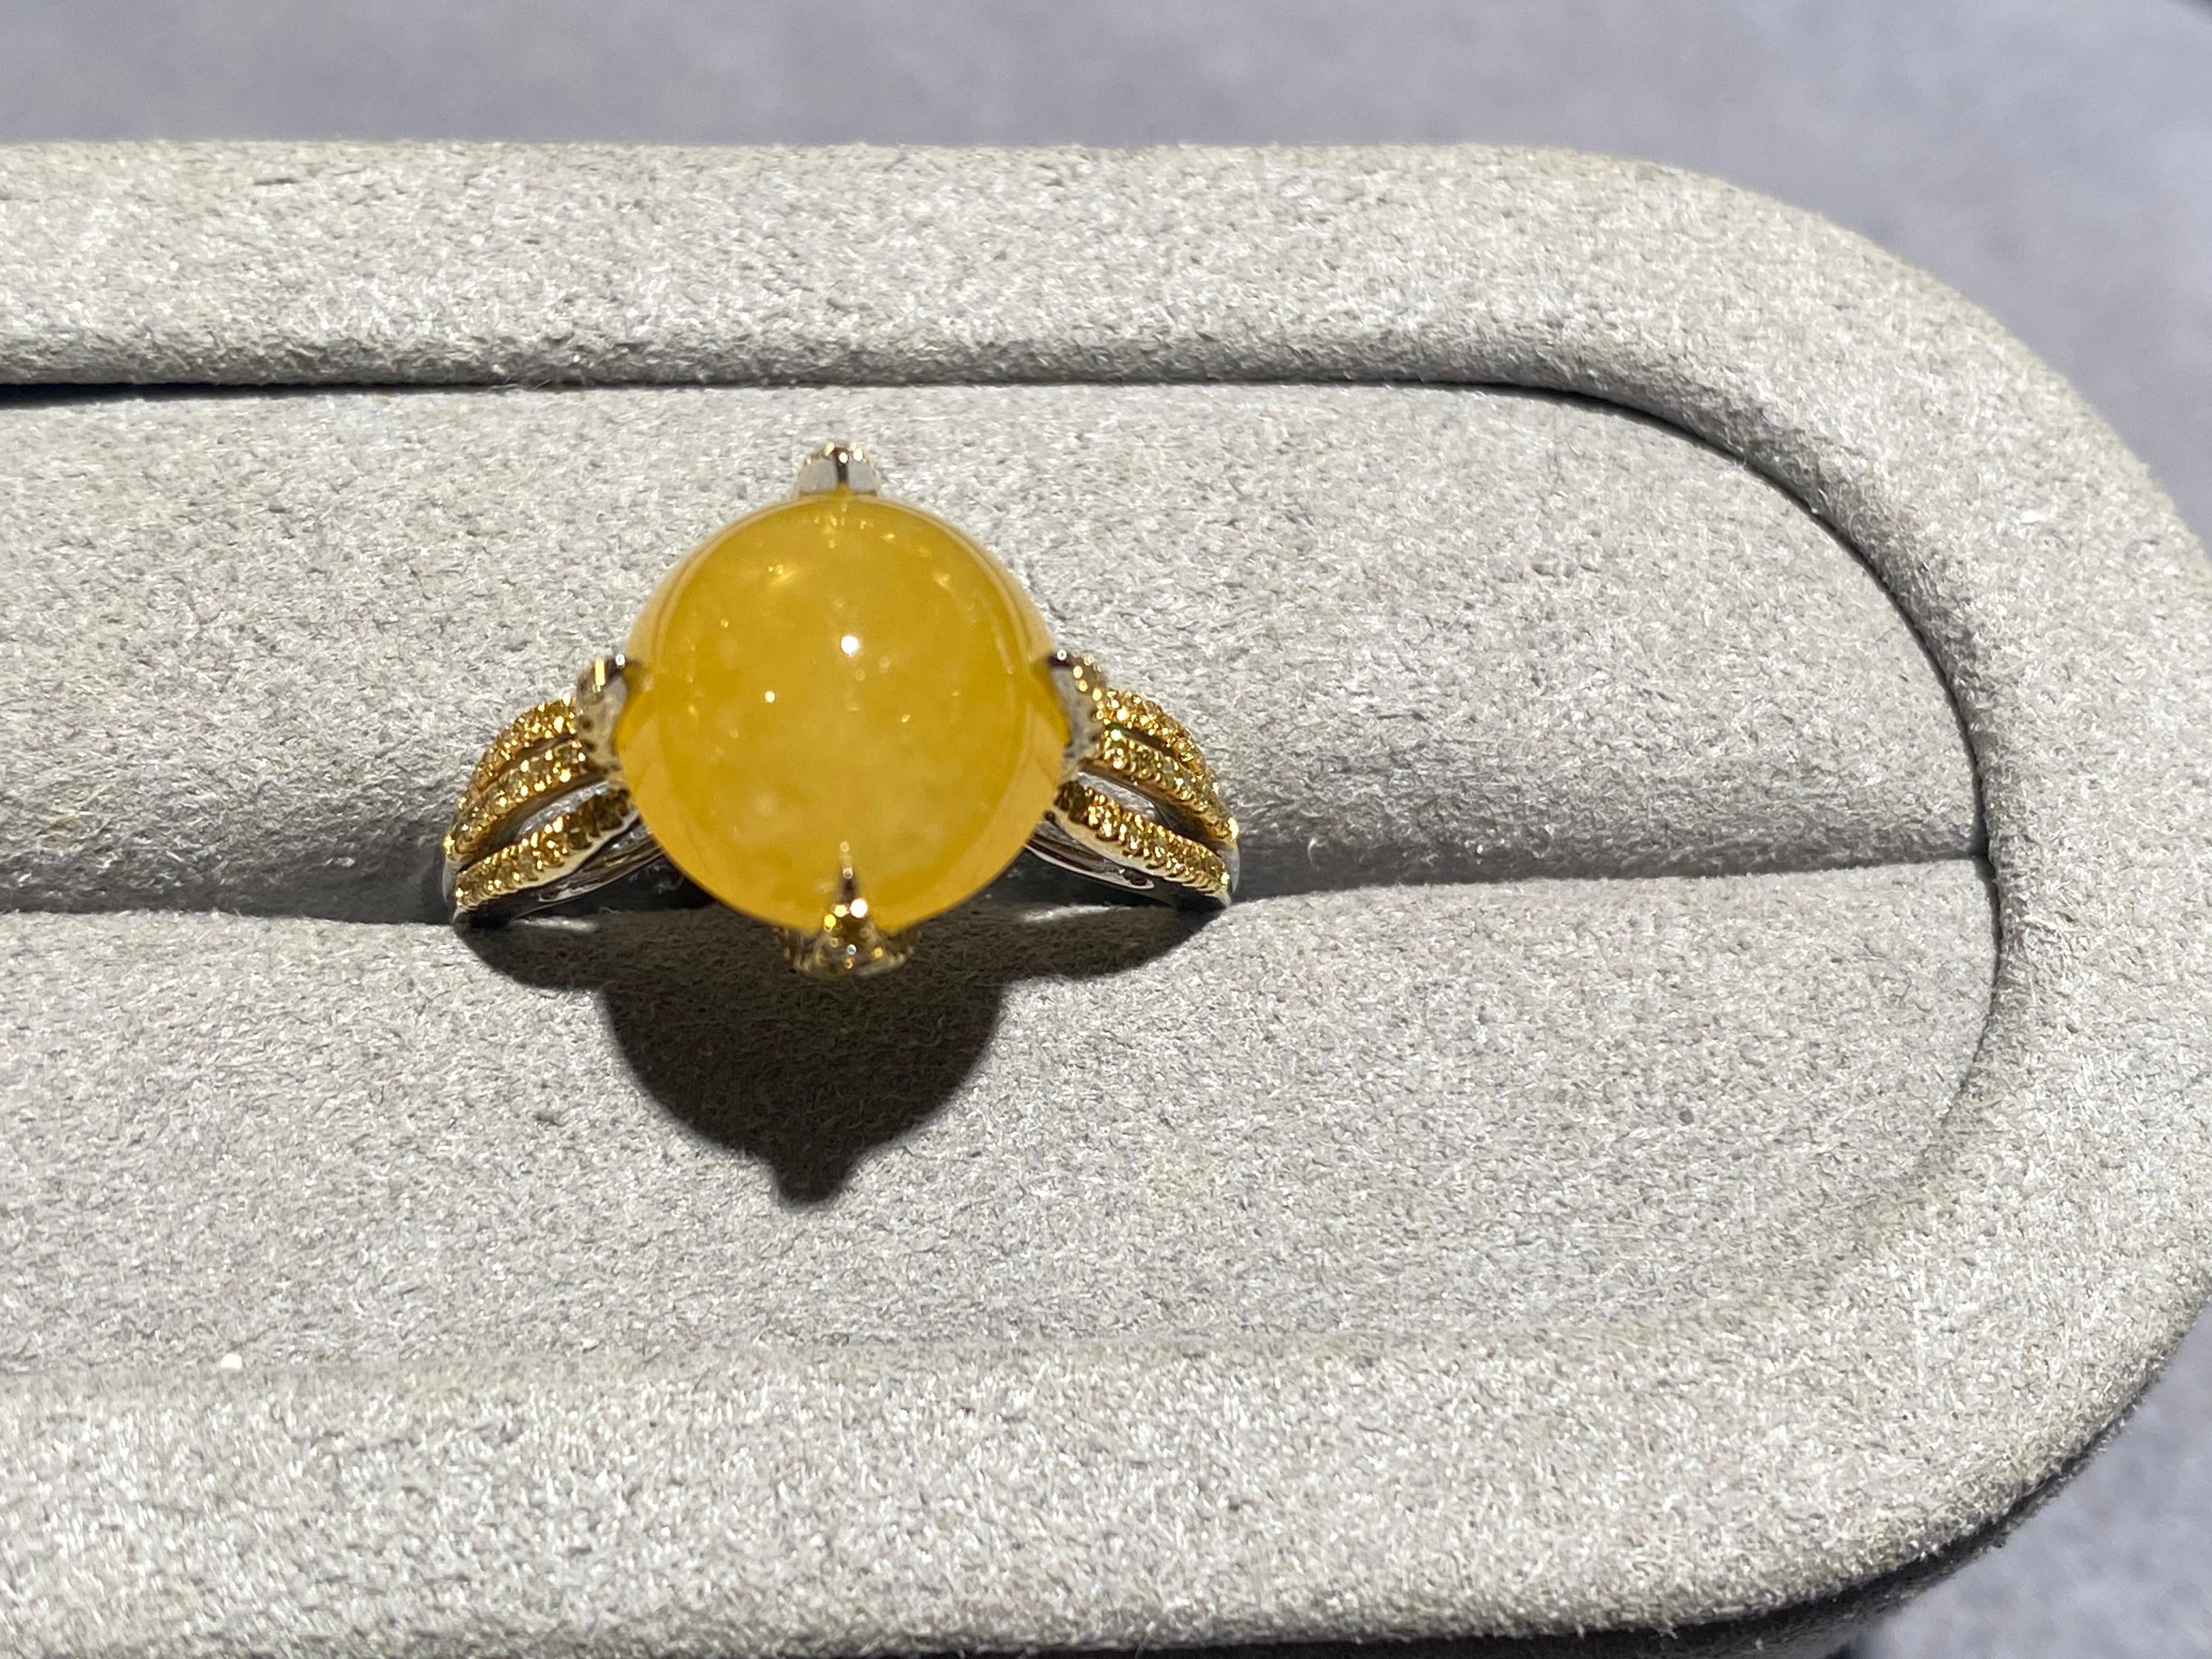 A type A yellow jadeite and diamond ring in 18k white gold. The yellow jadeite cabochon is secured by 4 big claws. Each of the claws is set with micro diamond pave. At the bottom of the jadeite, there are 2 layers of structures set with diamond